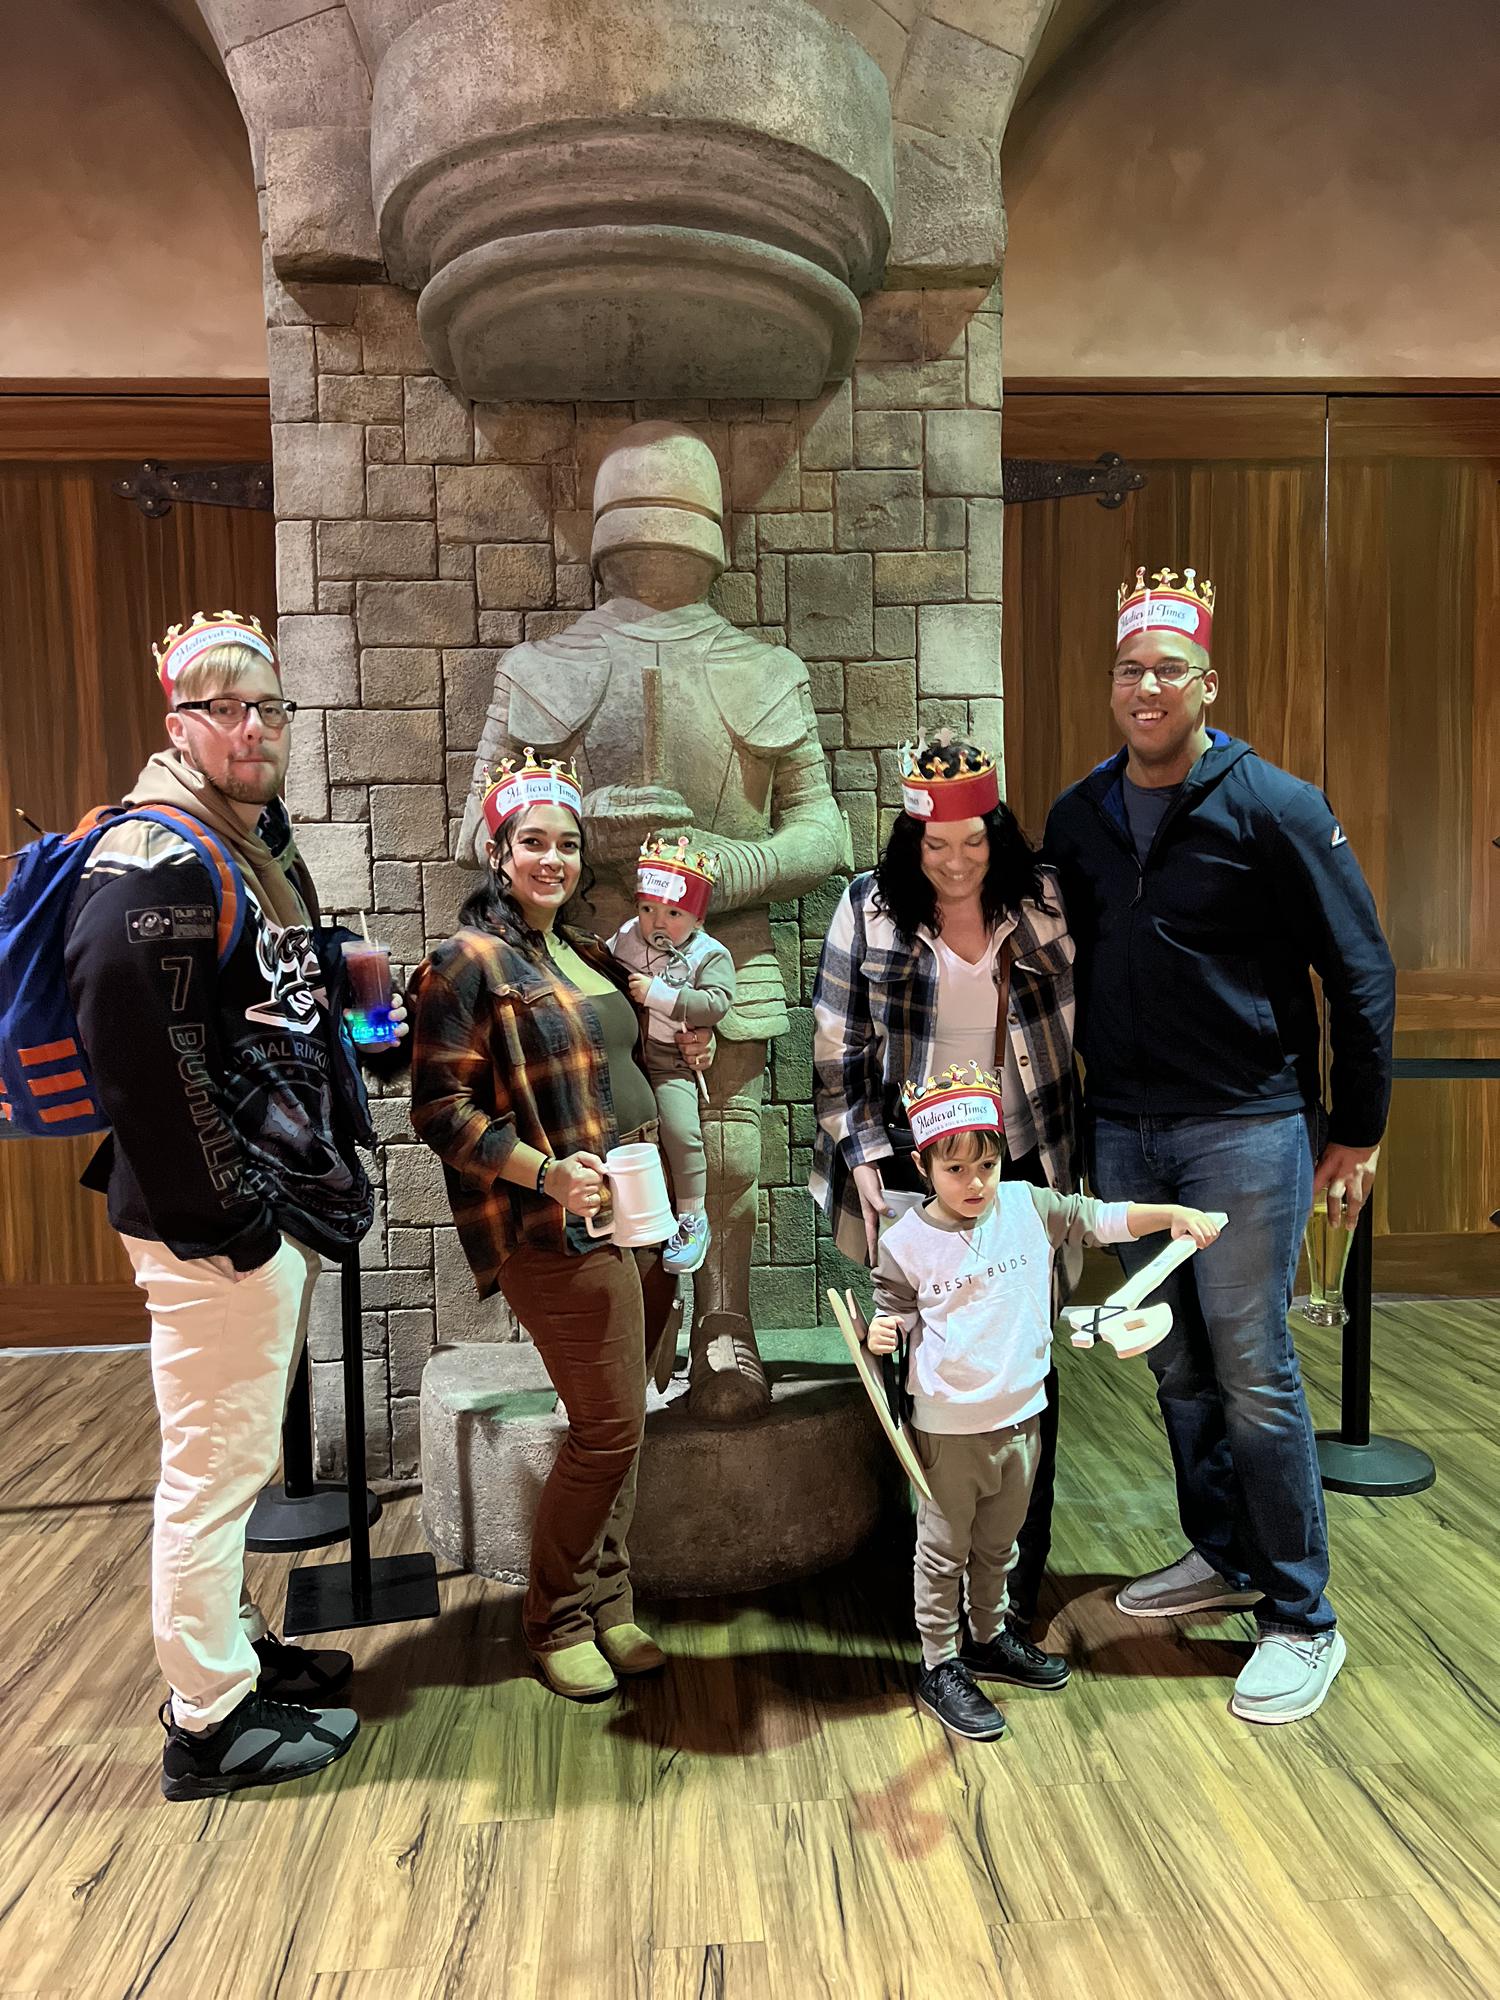 Medieval times!